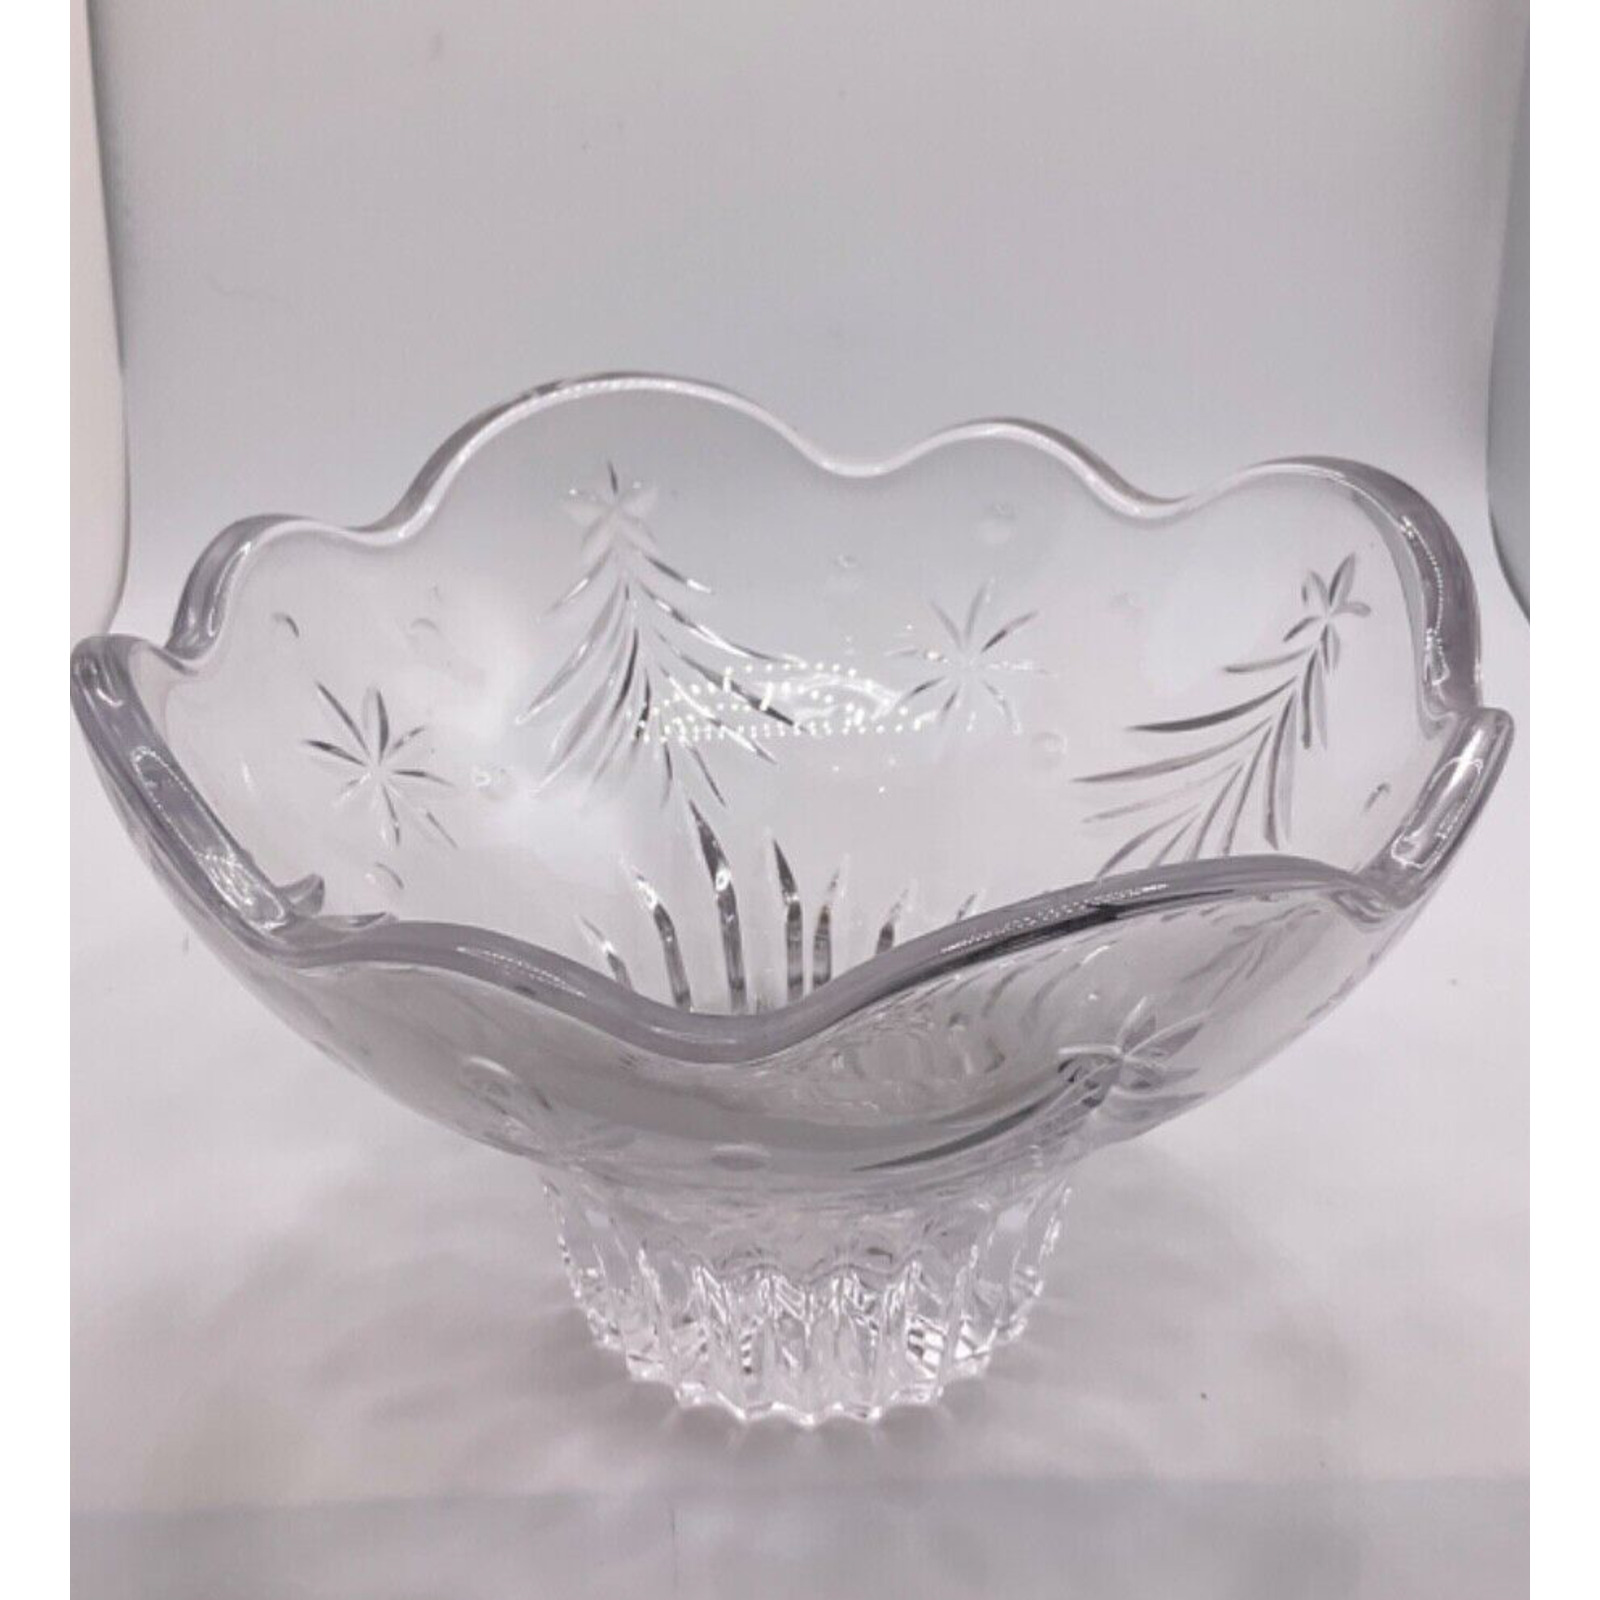 6” Crystal Vintage Footed Bowl - Scalloped Edges, Classic Christmas Tree Design